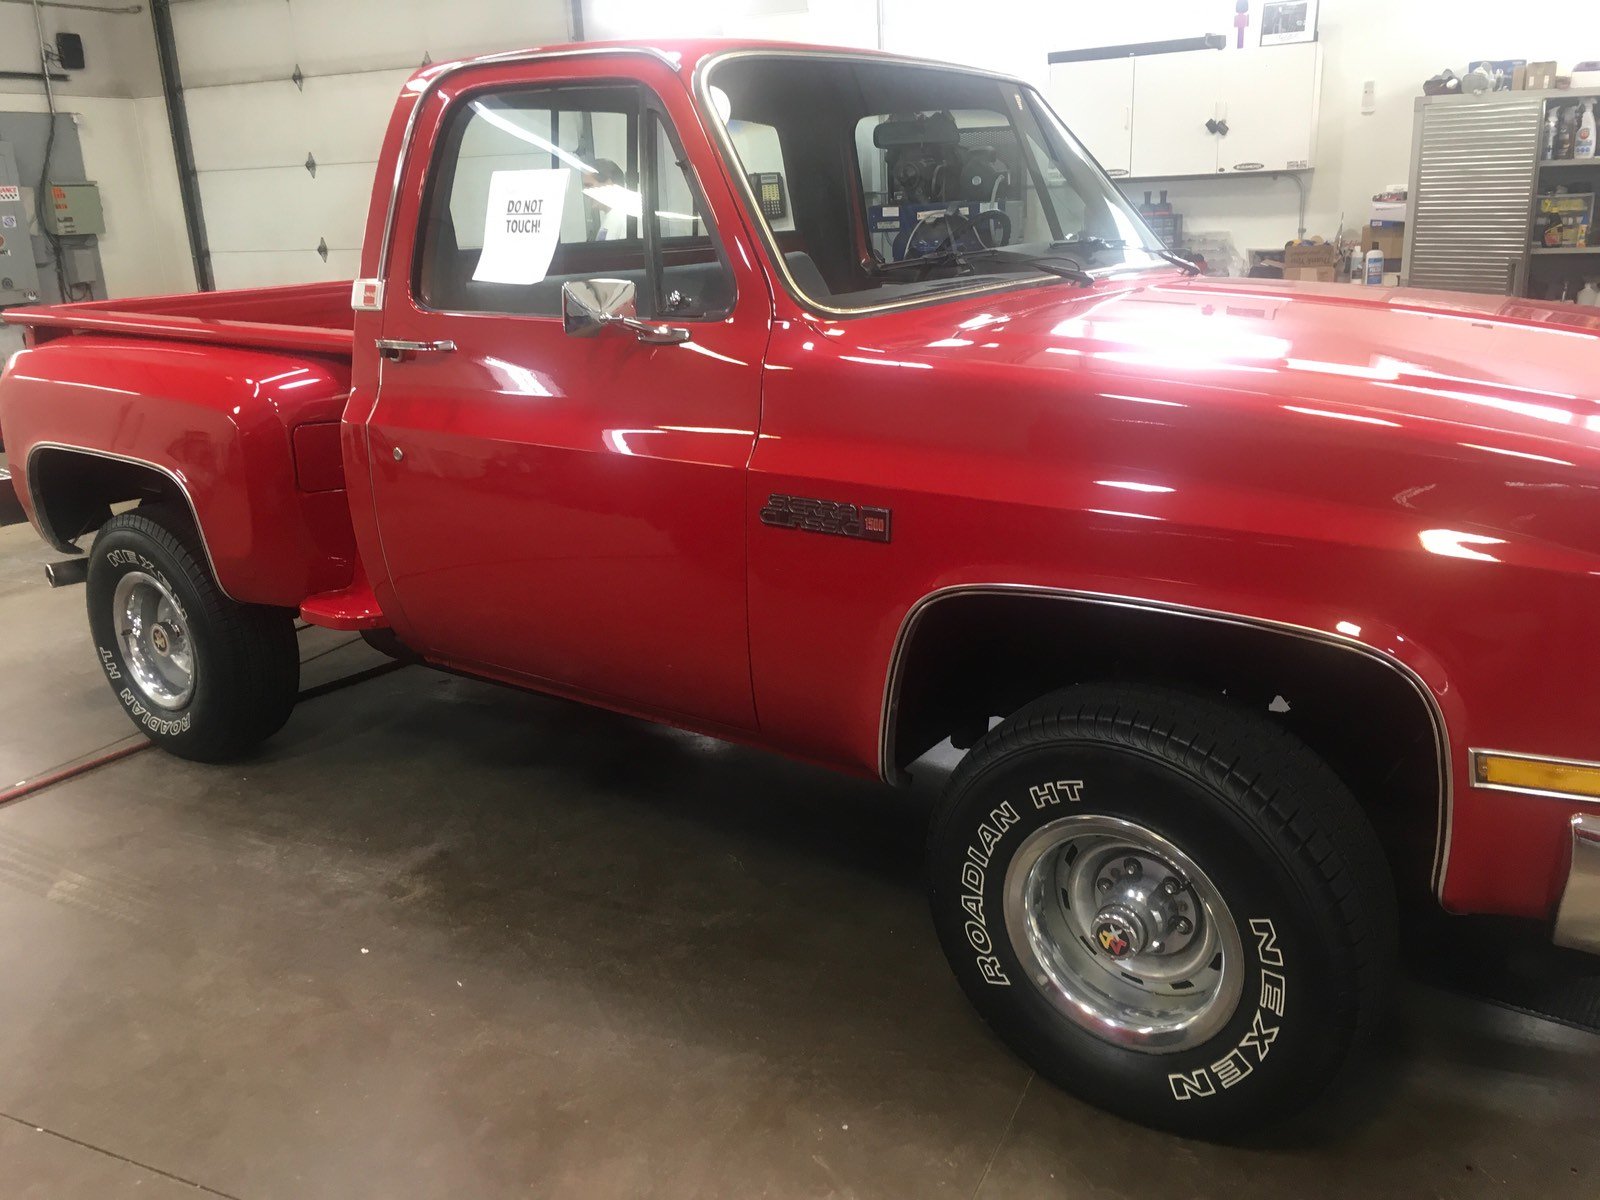 1985 Red GMC truck acquired Aug 2021